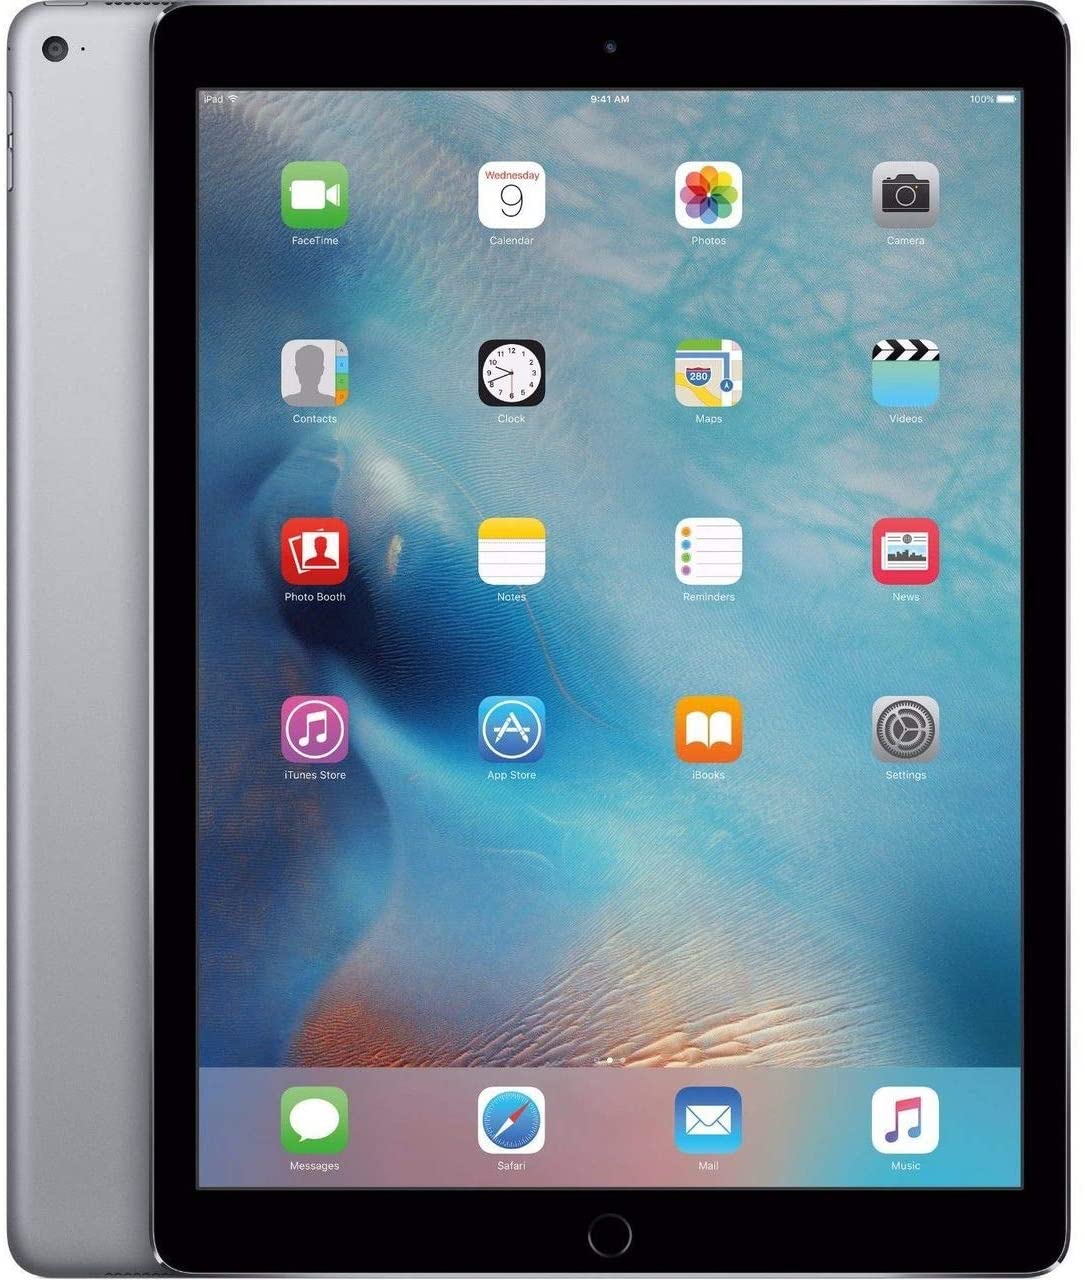 Apple iPad 5th Generation, 128GB, WIFI + 4G Unlocked All Carriers - Space Gray (Pre-Owned)